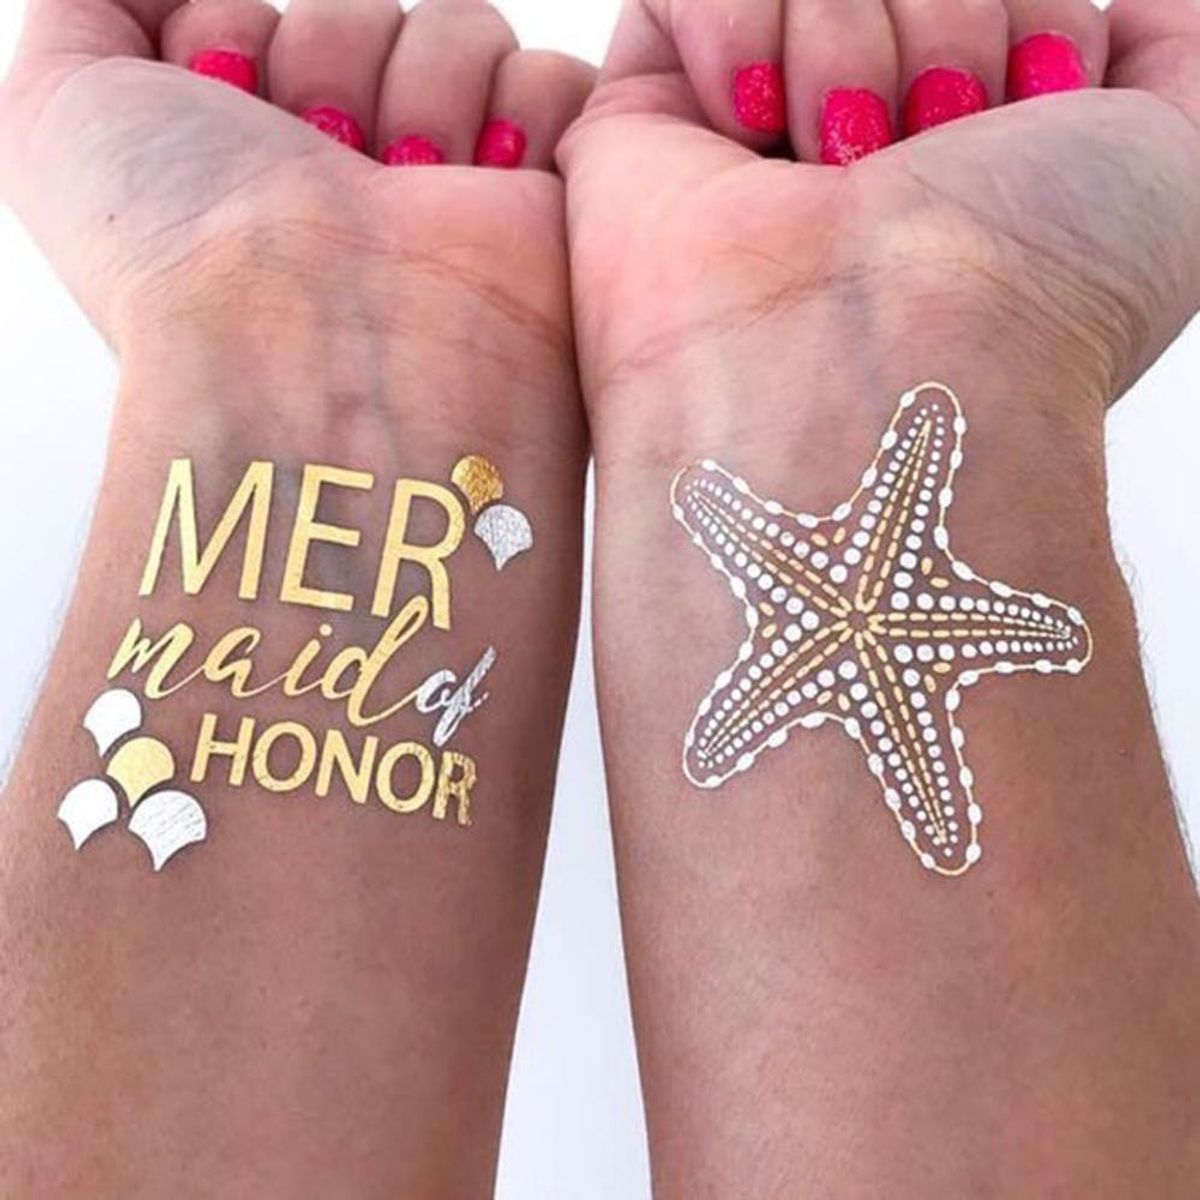 8 Bachelorette Party Tattoos You *Need* for Your Squad